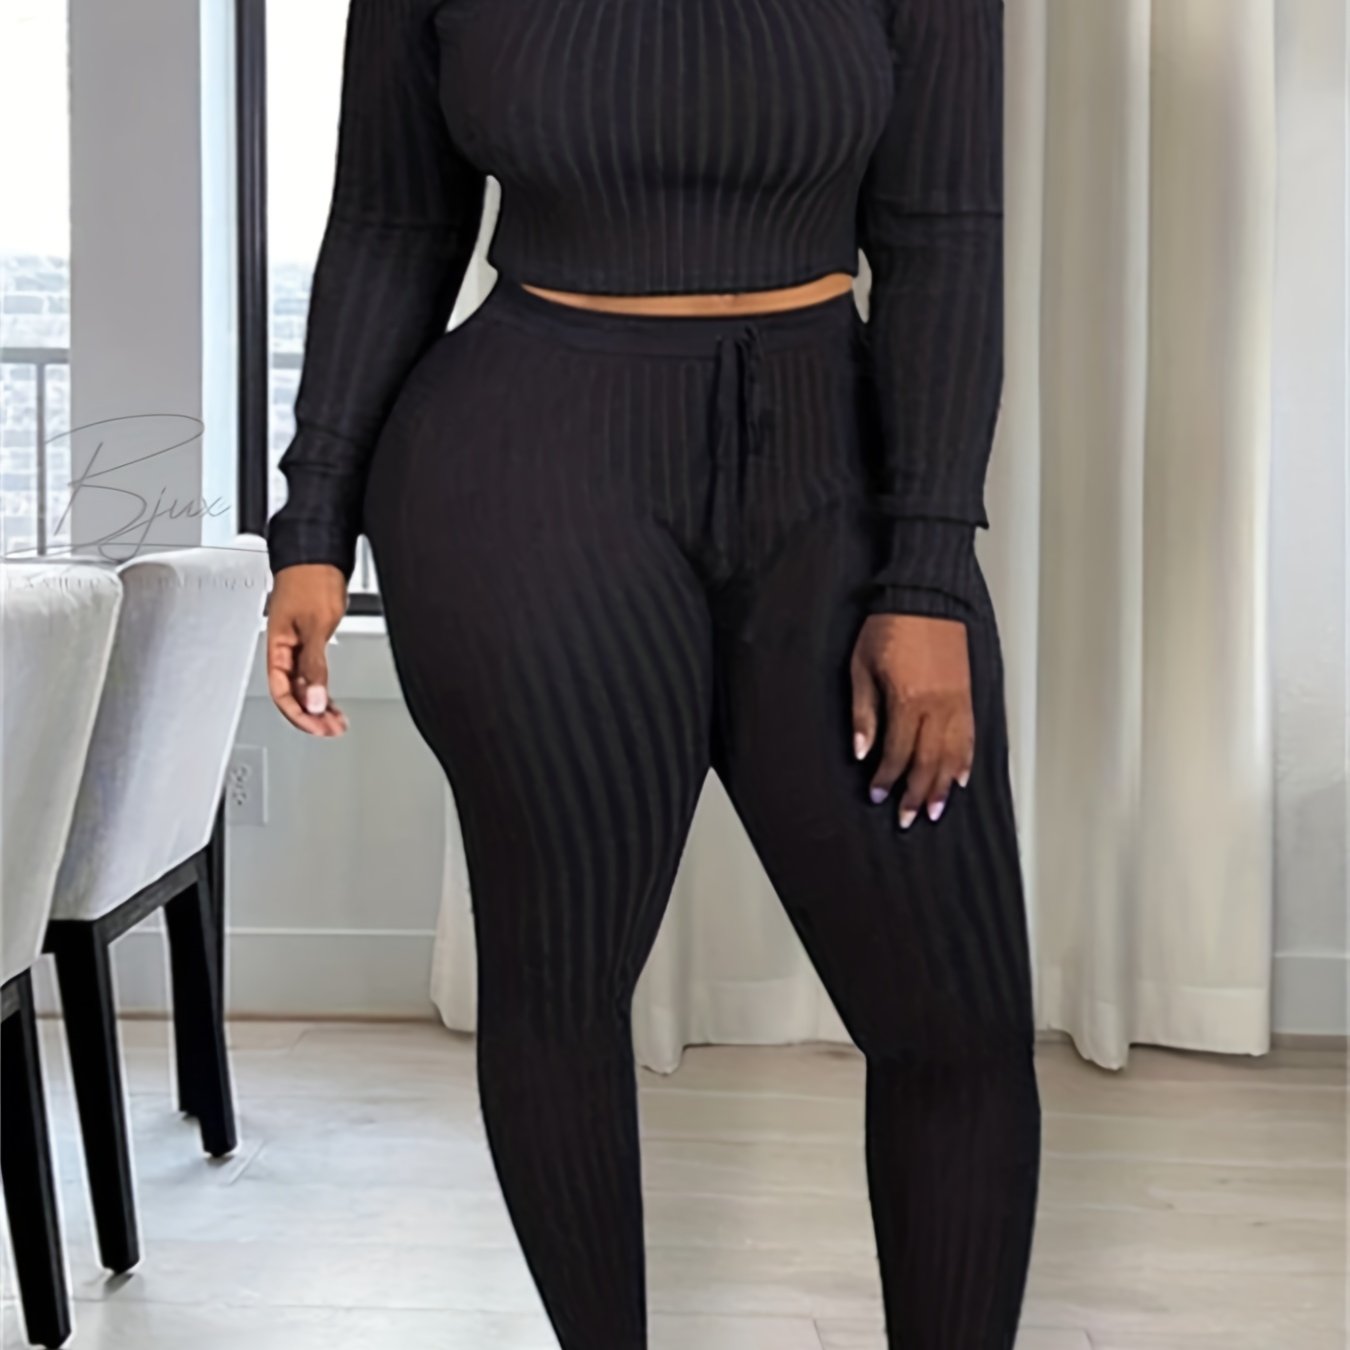 Final Sale Plus Size 2-Piece Striped Top and Solid Legging Set in